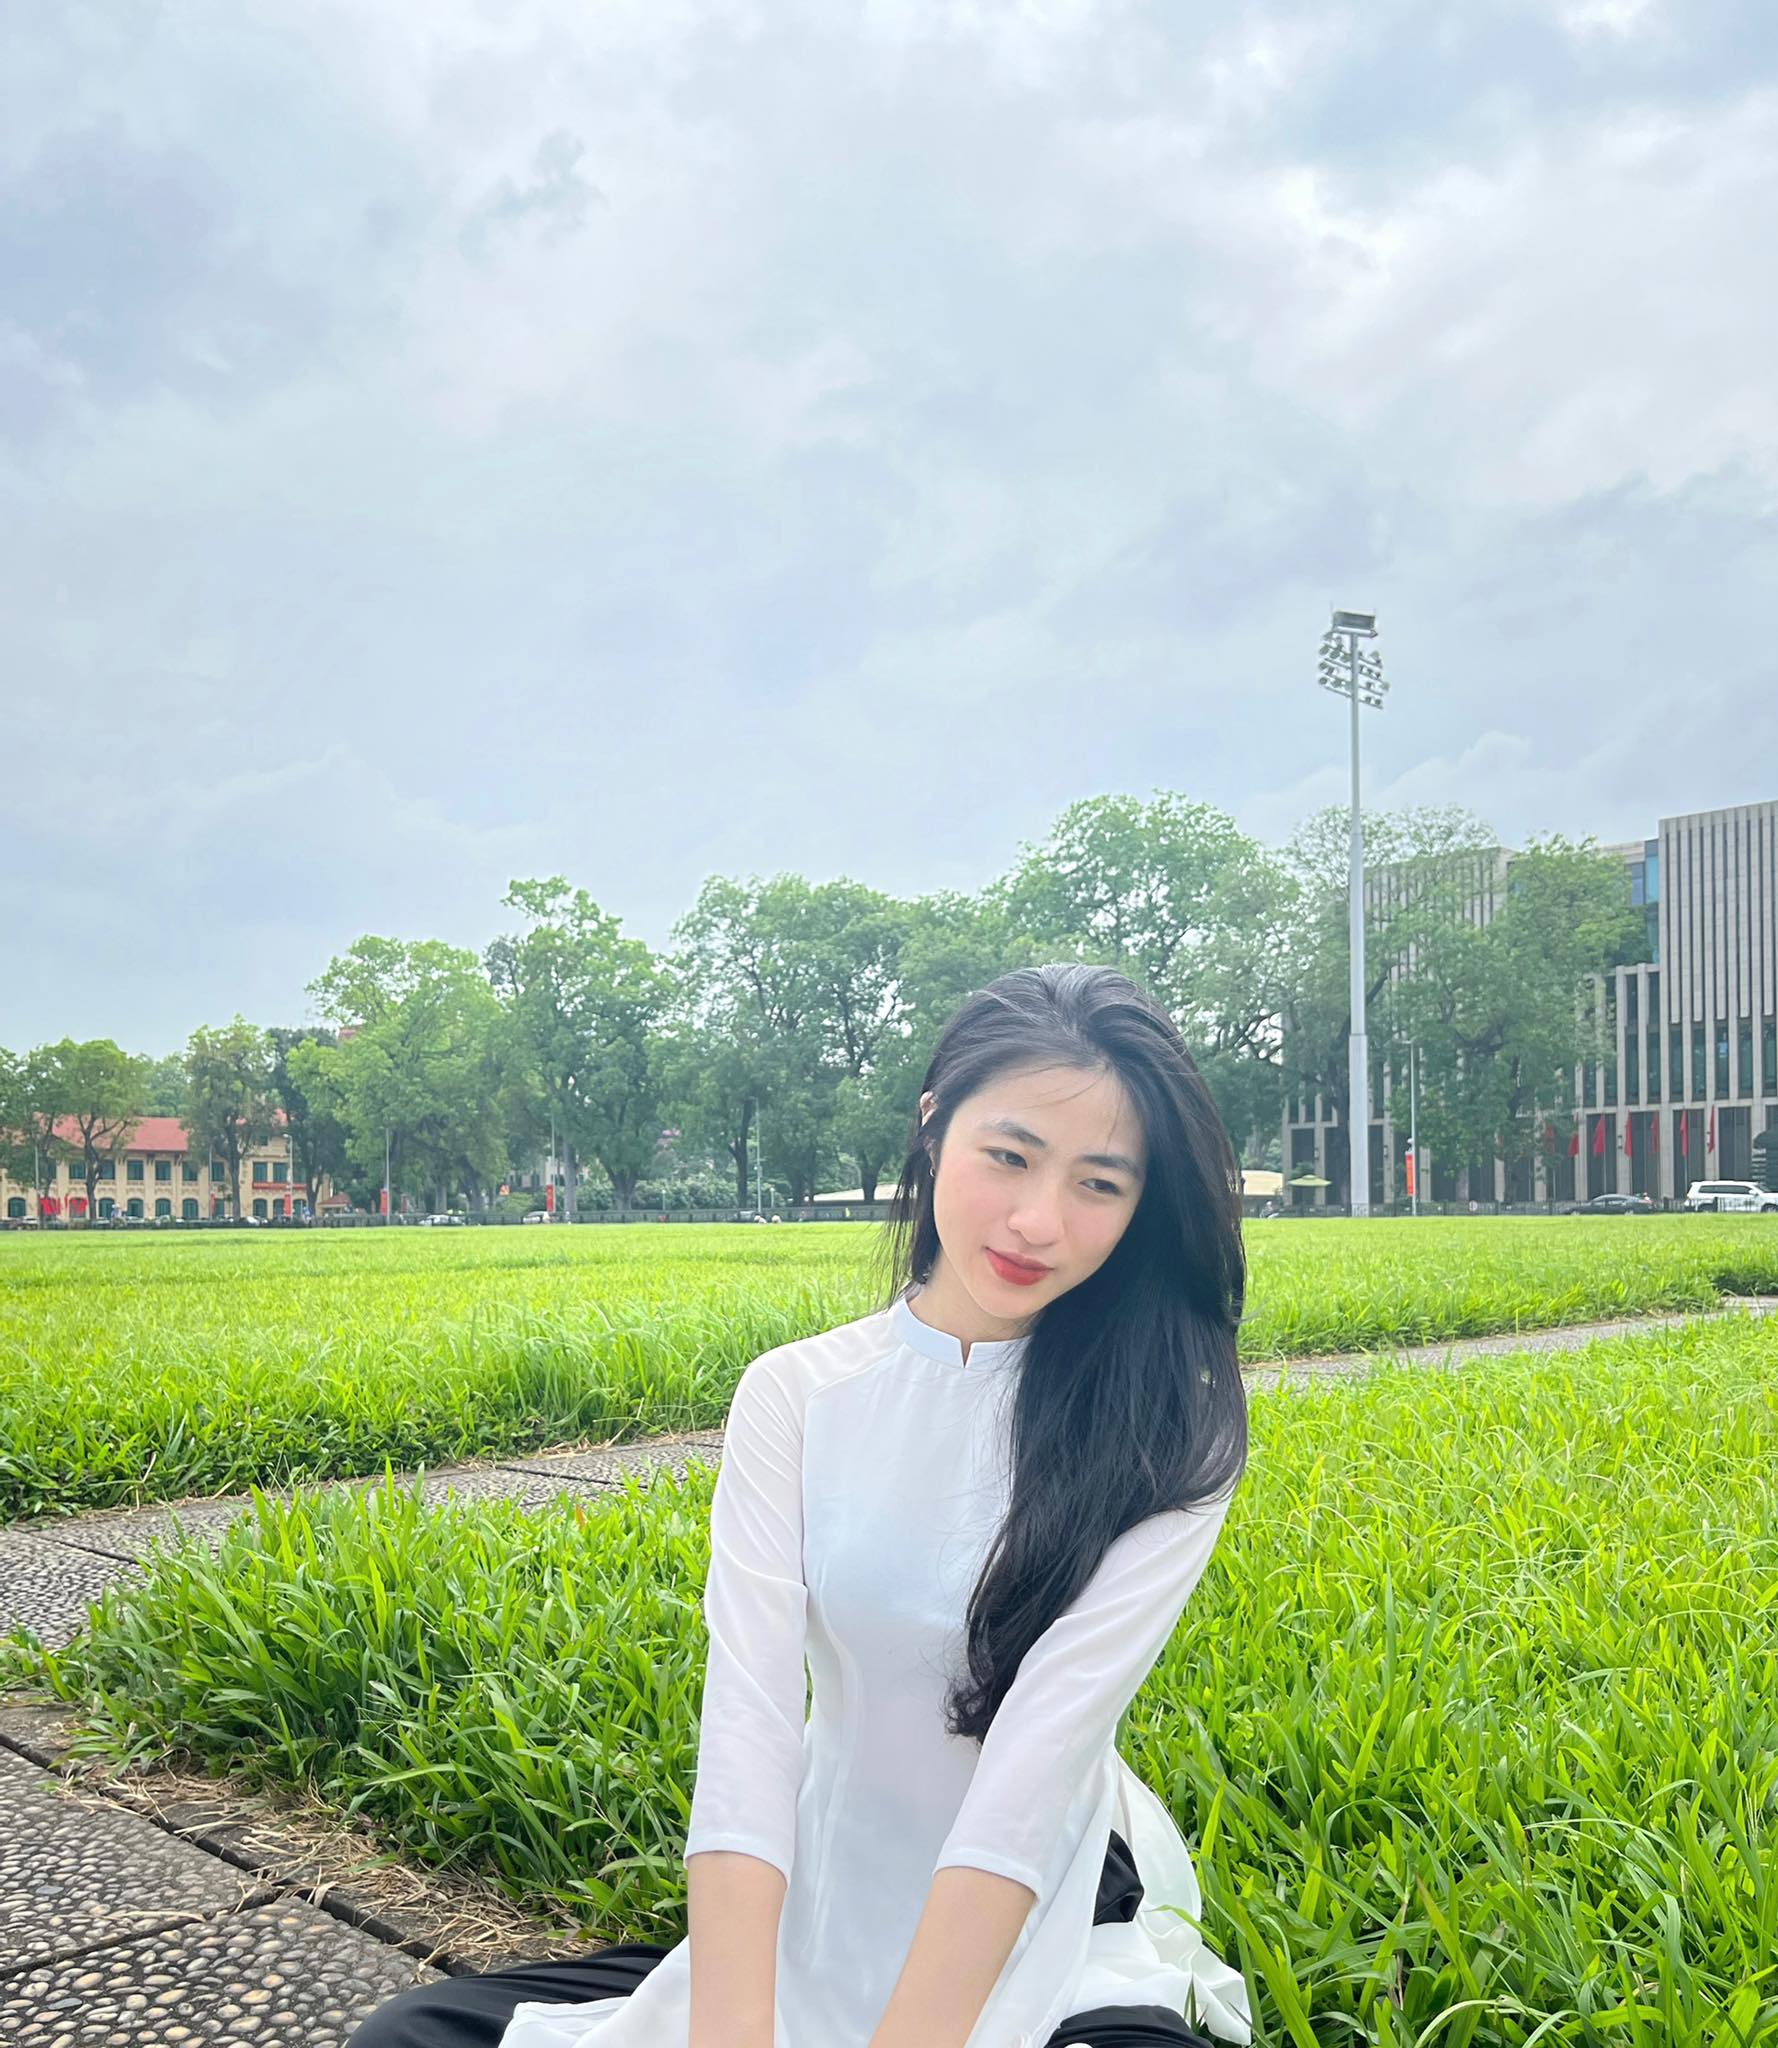 Meet the beautiful female SEA Games volunteer who caused a fever on social media: Born in 2003, passed 2 universities and is extremely multi-talented - Photo 5.